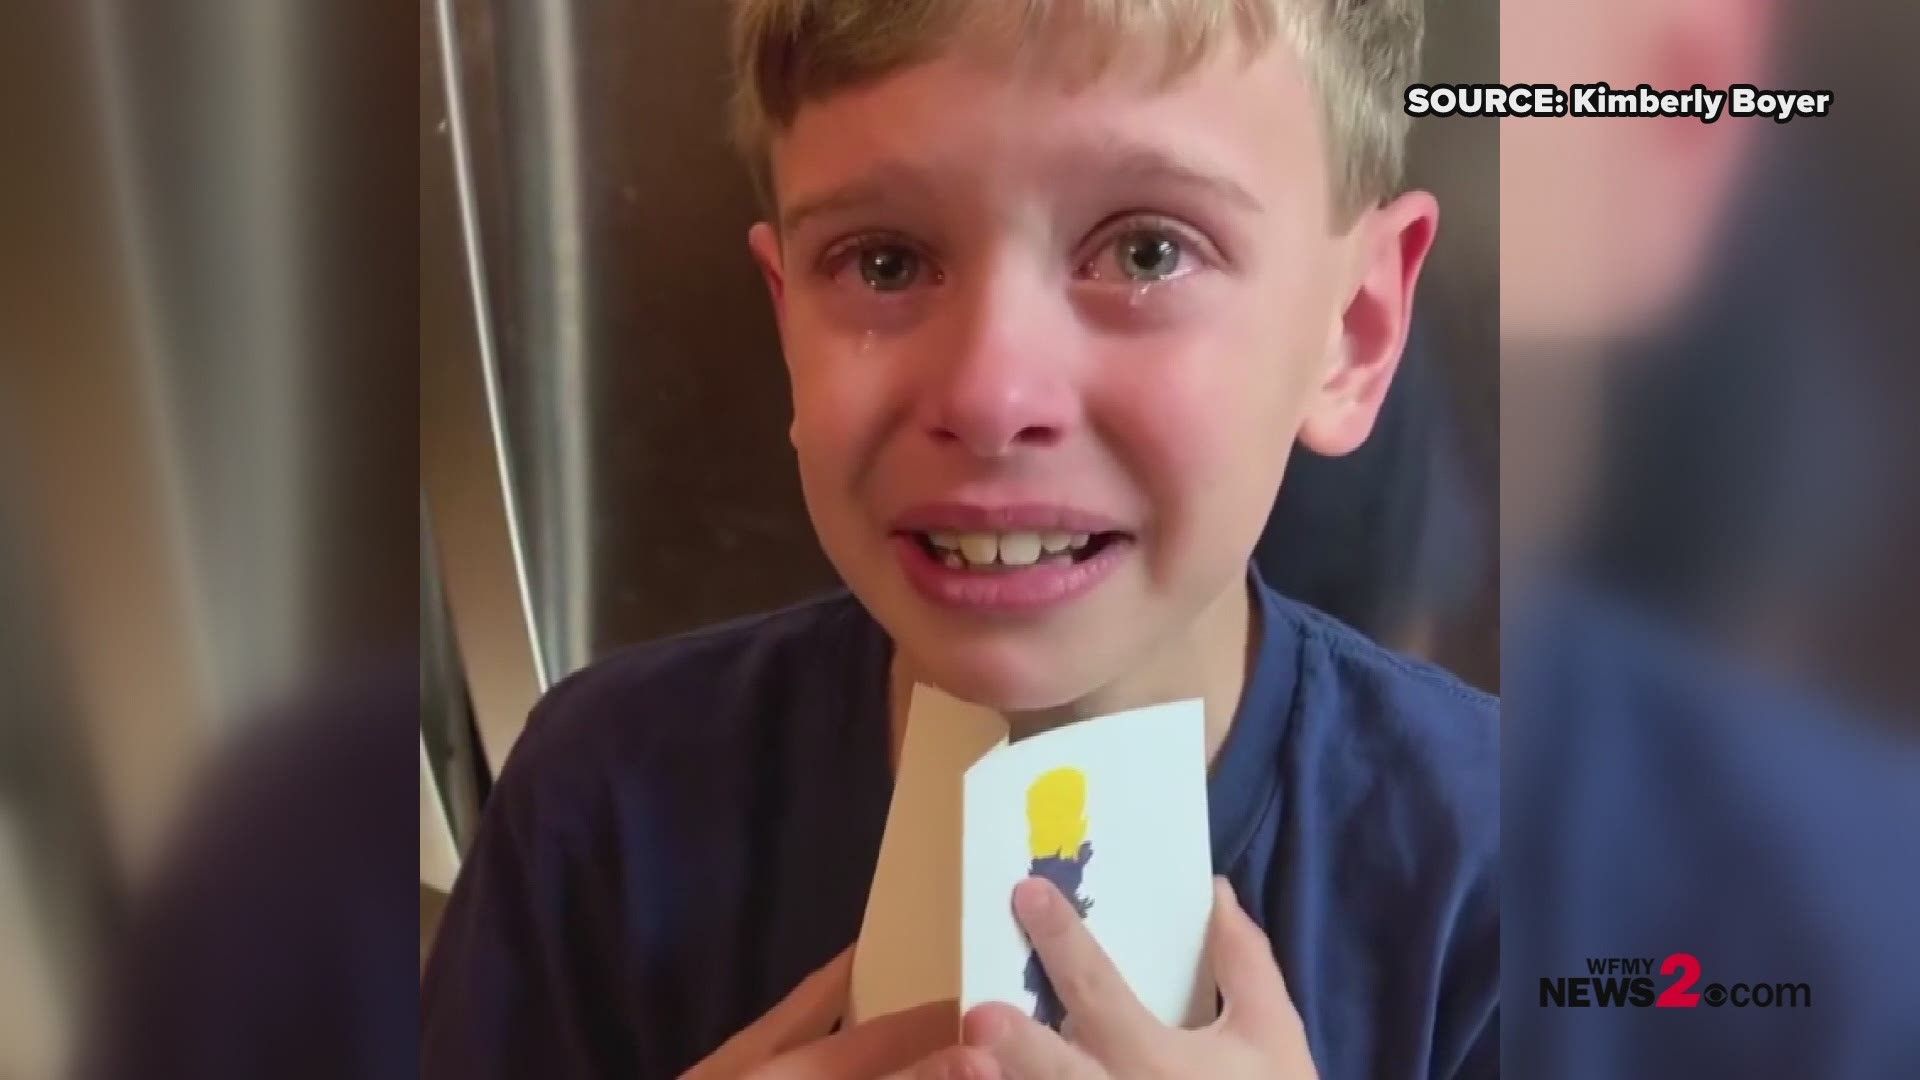 When 9-year-old Henry Boyer wrote a letter to the Michigan Marching Band, he didn't expect a response. But when he got one, he couldn't hold back tears of gratitude.